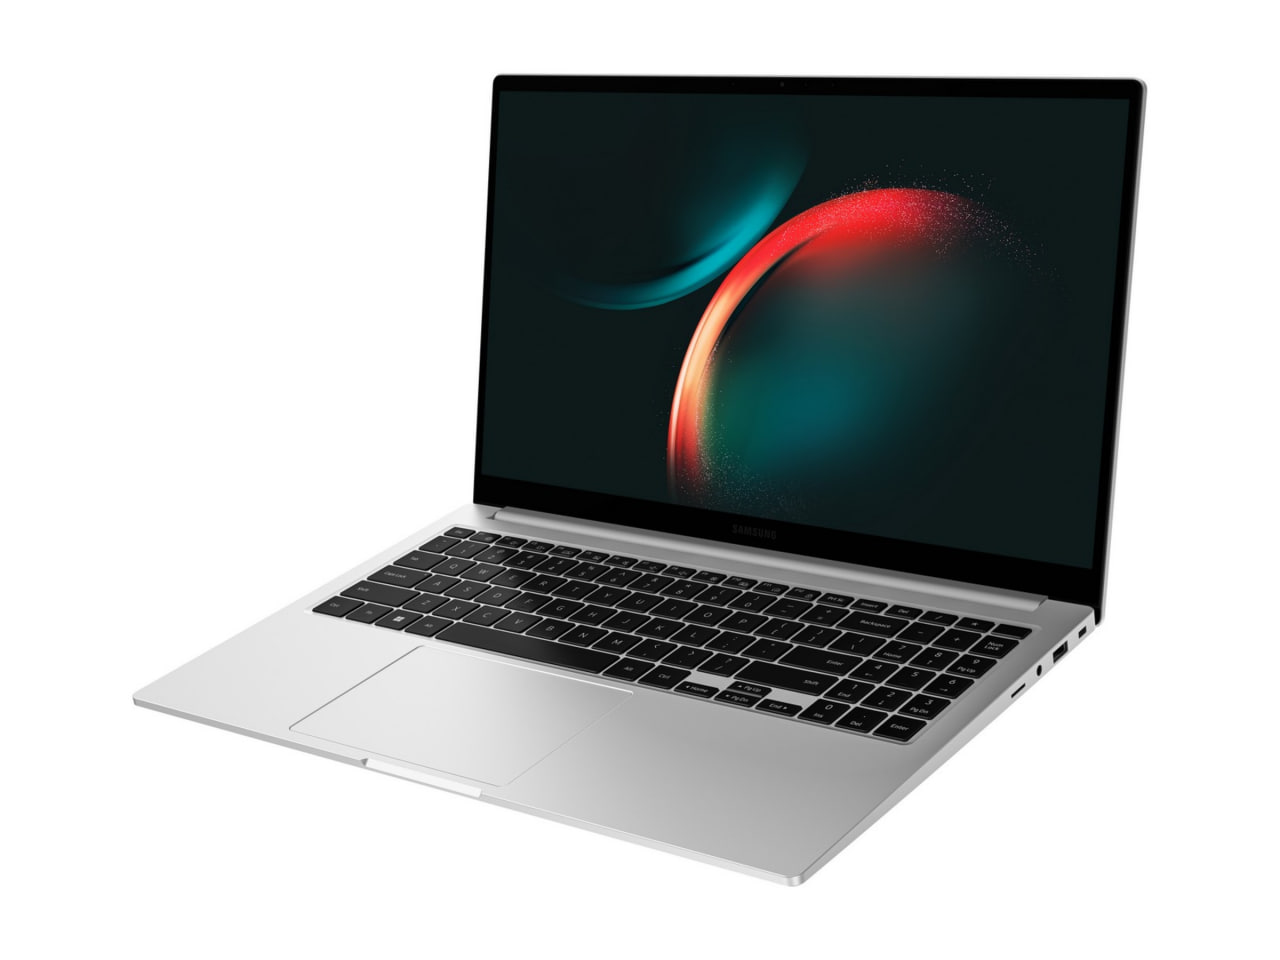 Samsung Book 3 specifications design